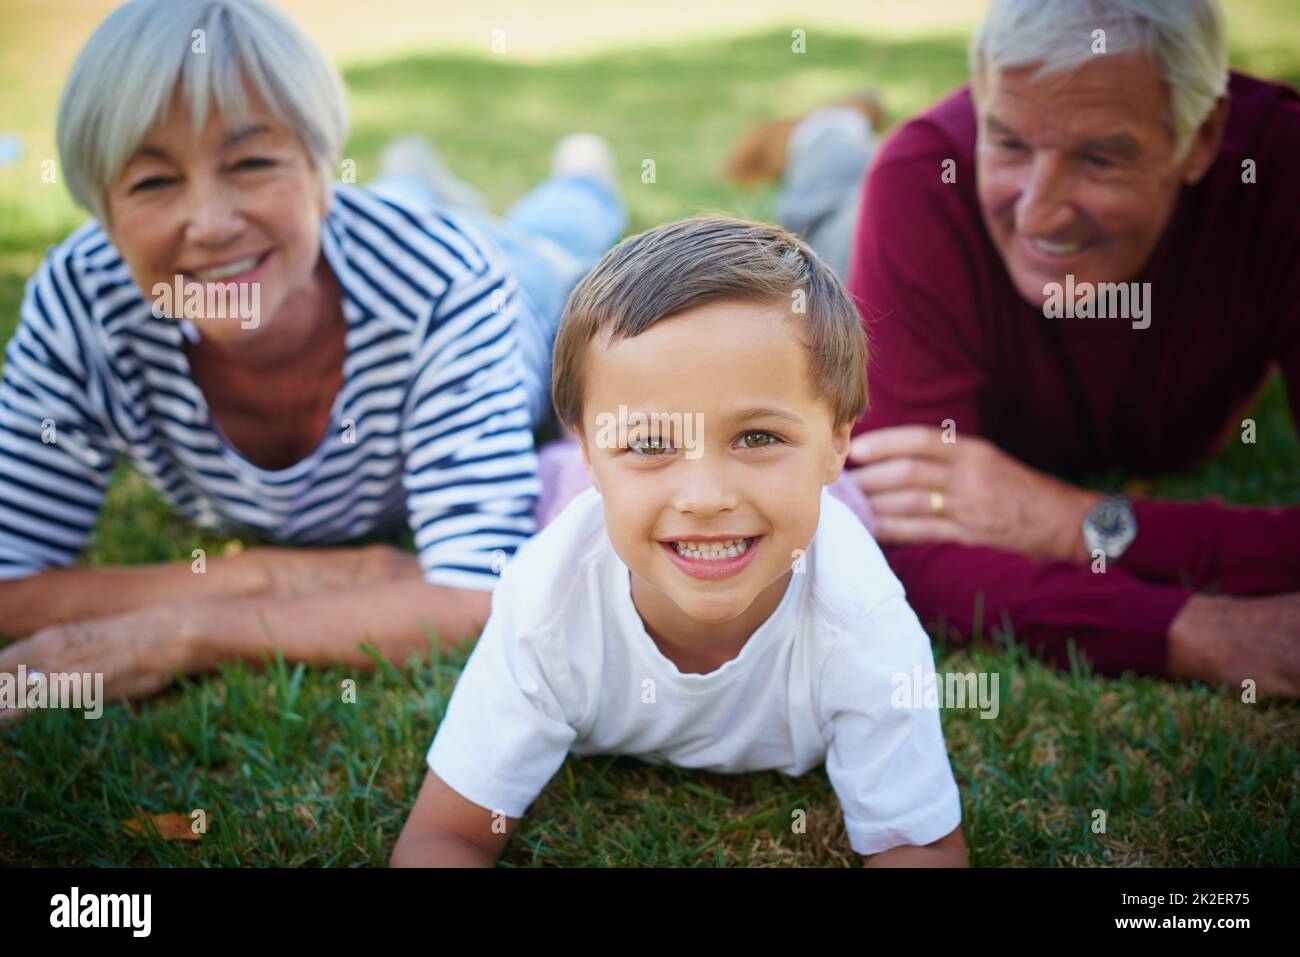 They love him to bits. Cropped portrait of a little boy spending time with his grandparents. Stock Photo